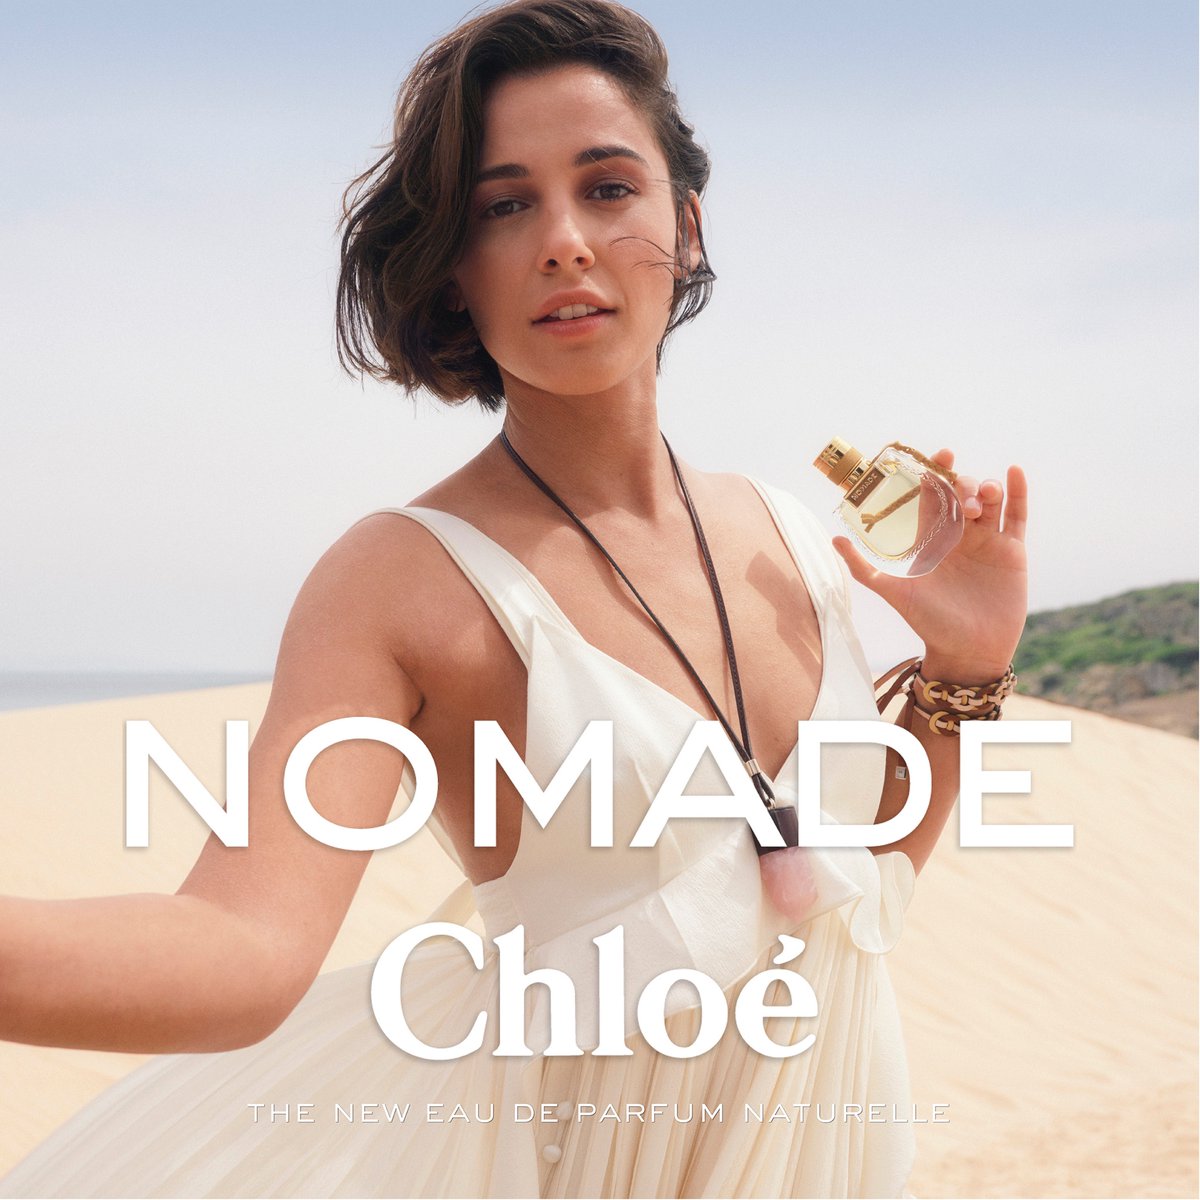 I am very excited to announce that I will be the new face of the new @Chloefashion Nomade fragrance. The fragrance will be launched on Feb 1st 2022. #chloenomade